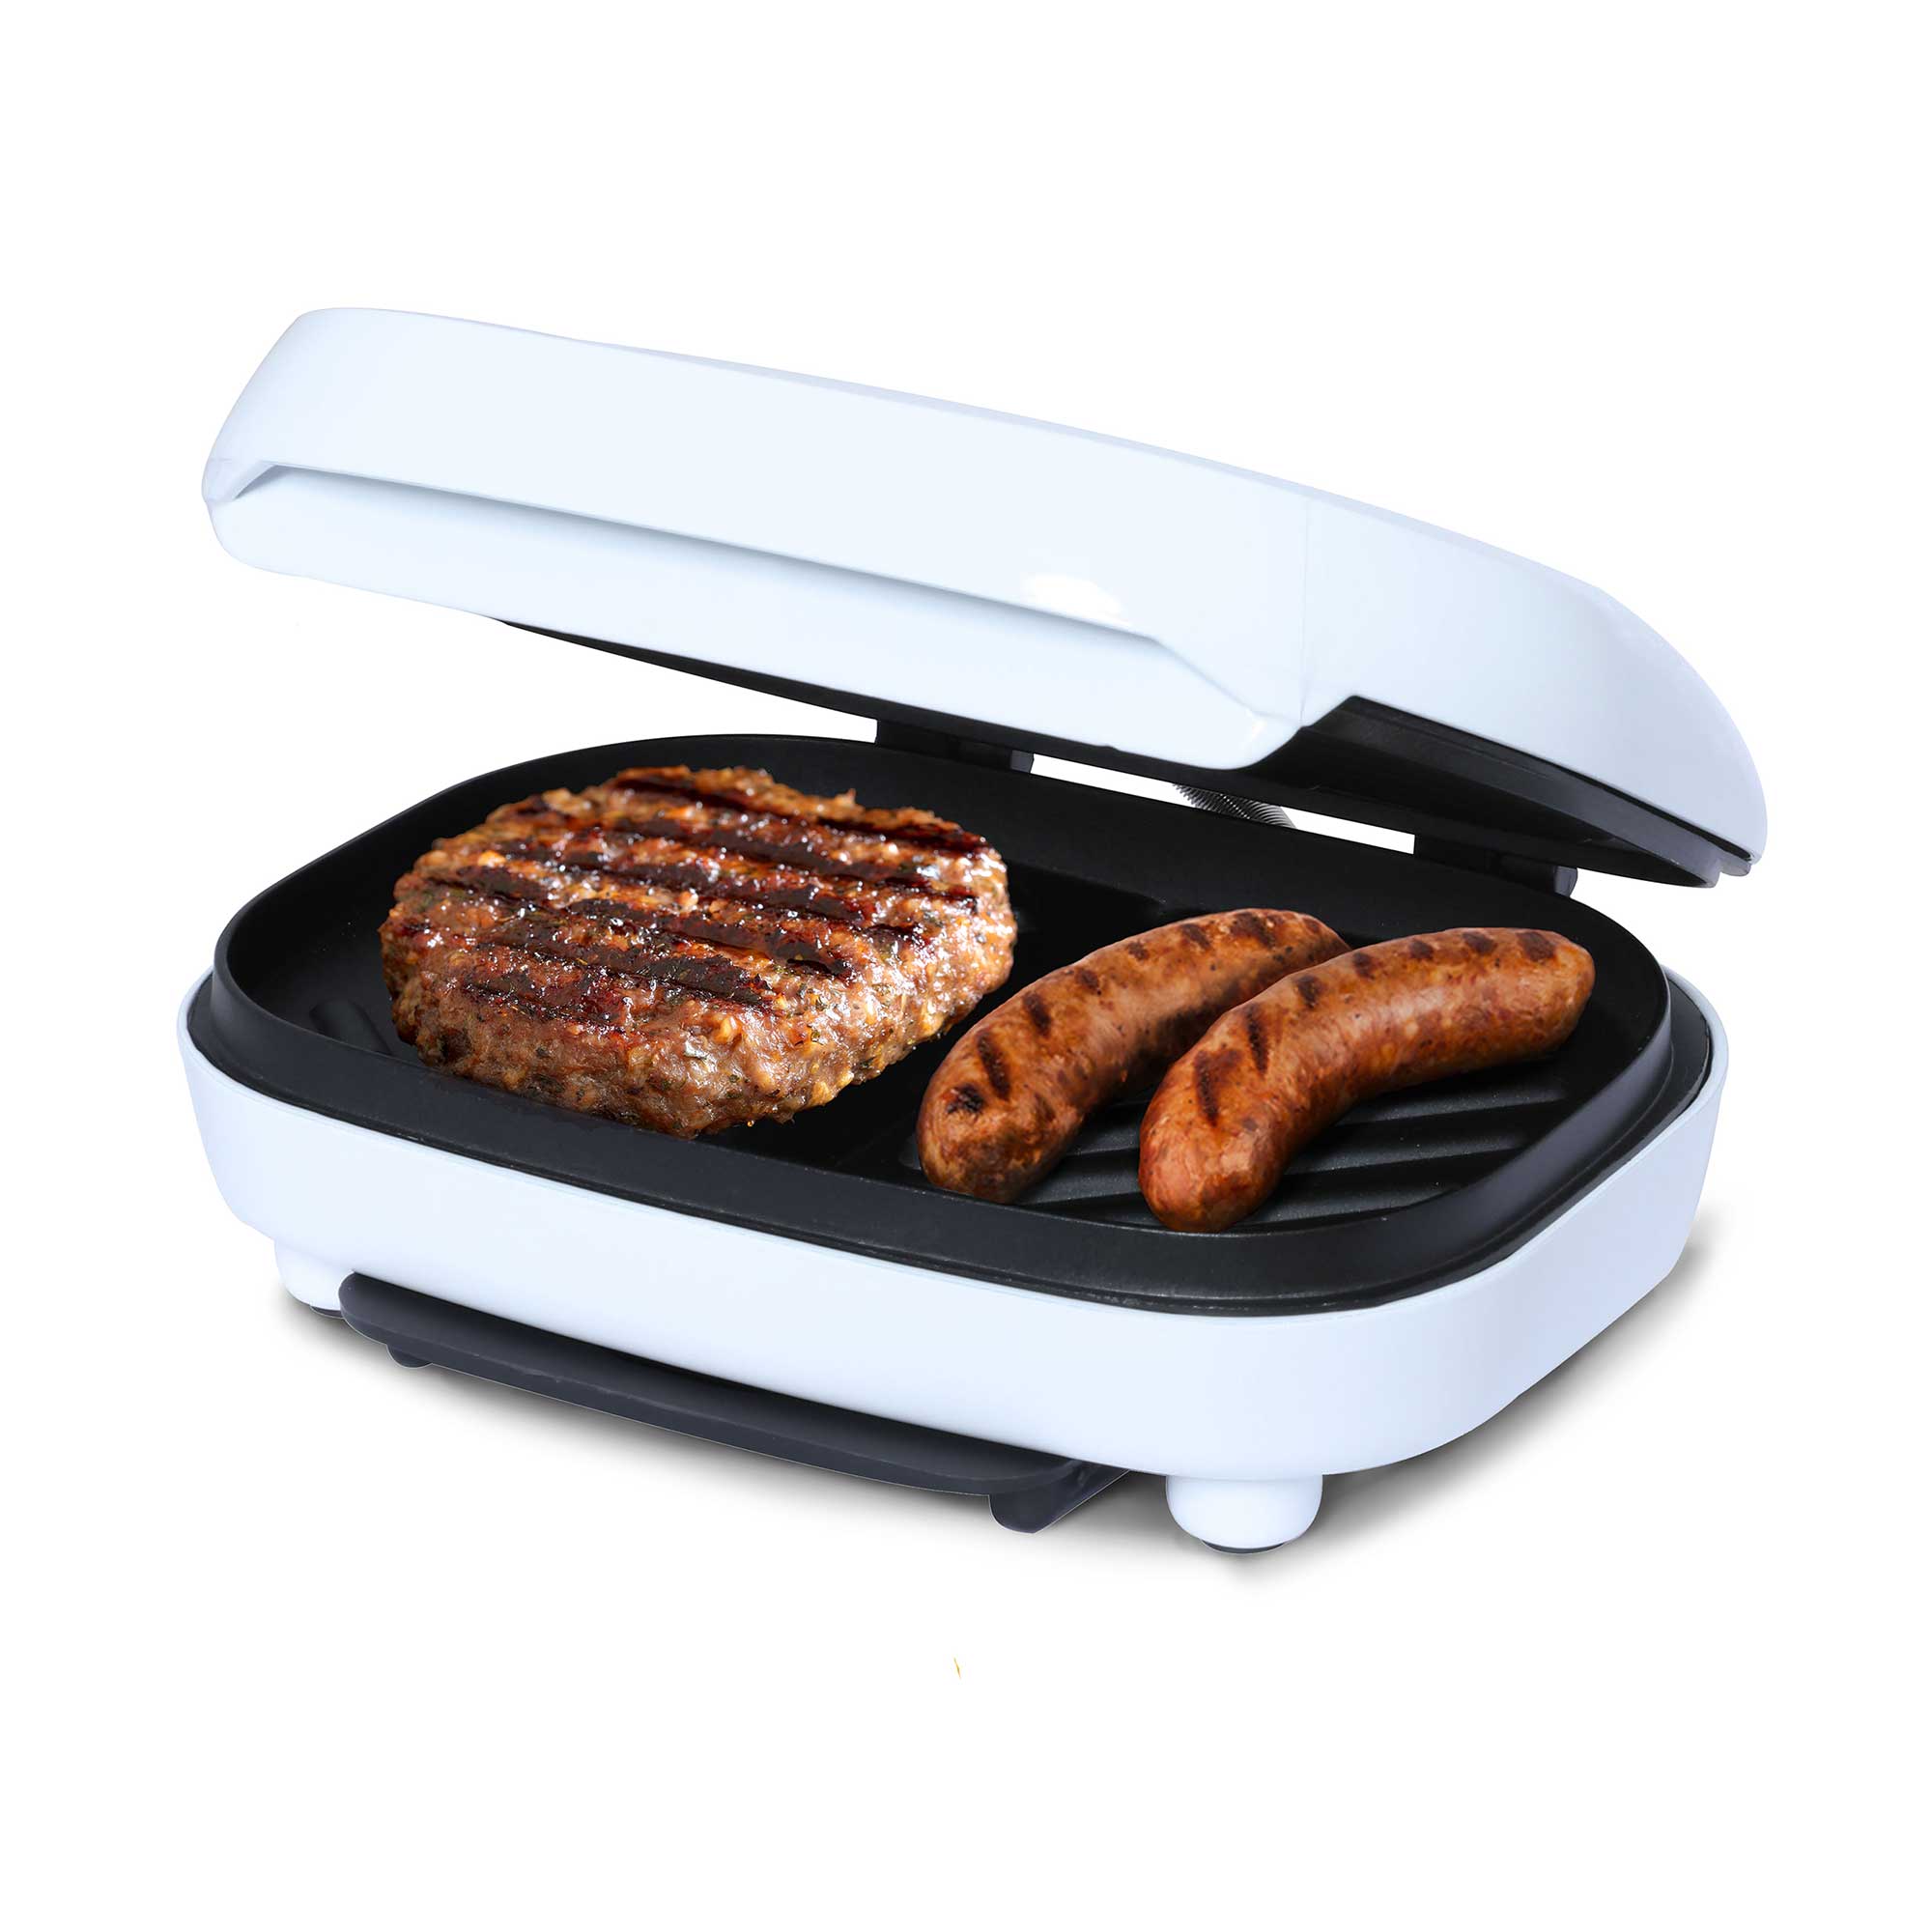 BrentwoodAppliances Nonstick Indoor Electric Copper Grill/Panini Press -  9786256